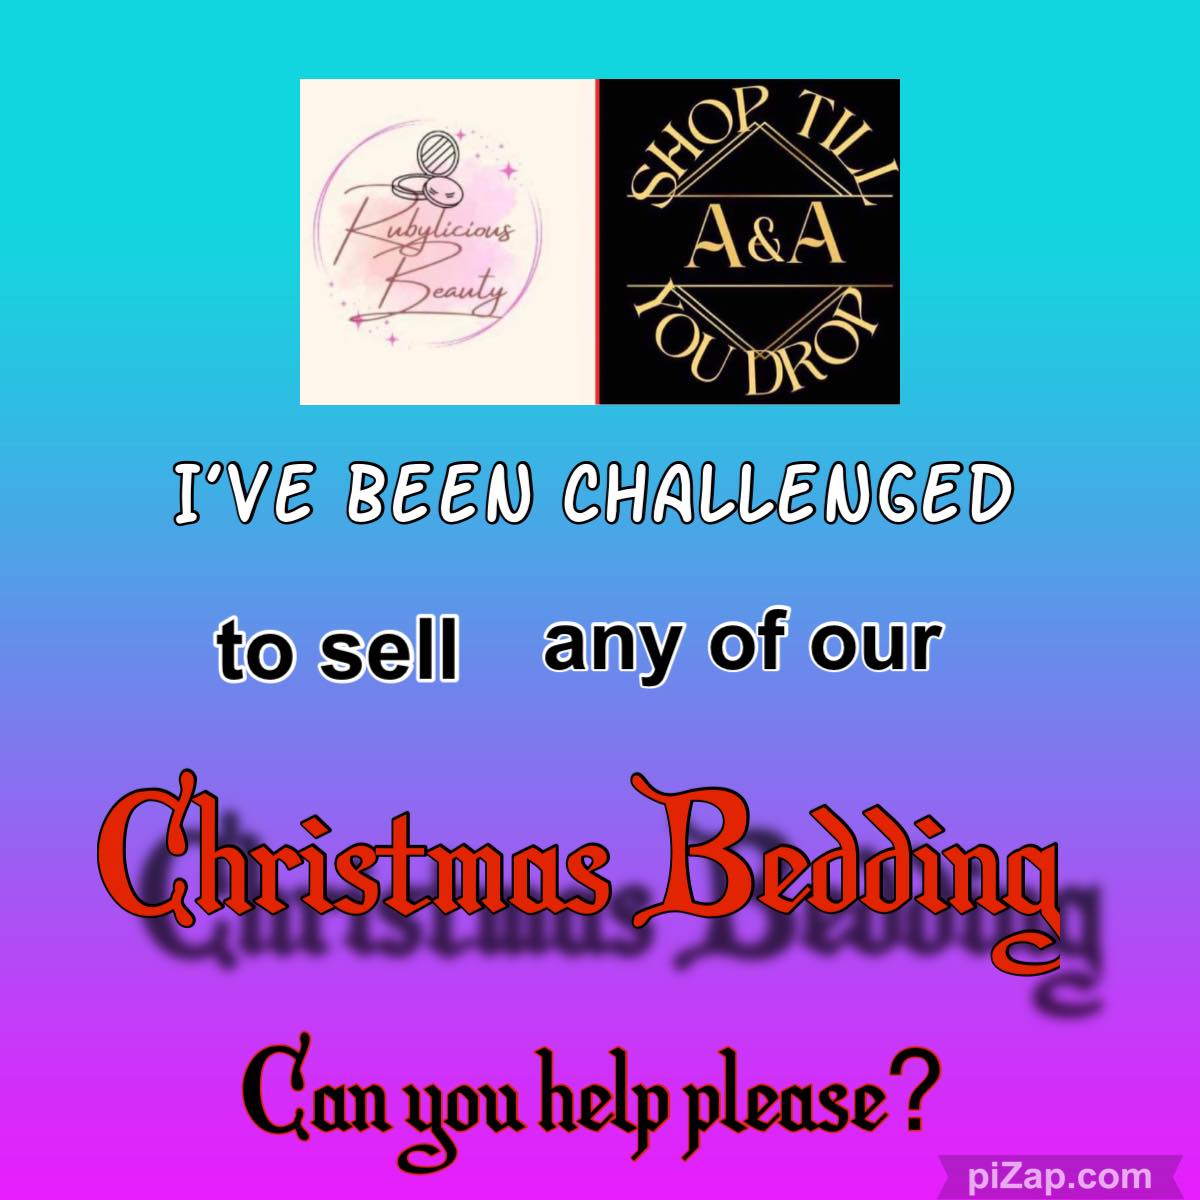 I've Been Challenged To Sell Any Of Our Christmas Bedding 

Can you please?

Link below👎👎👎👎

rubyliciousbeauty.myshopify.com/search?_pos=2&…

#challenged #selling #christmasbedding #rubyliciousbeauty